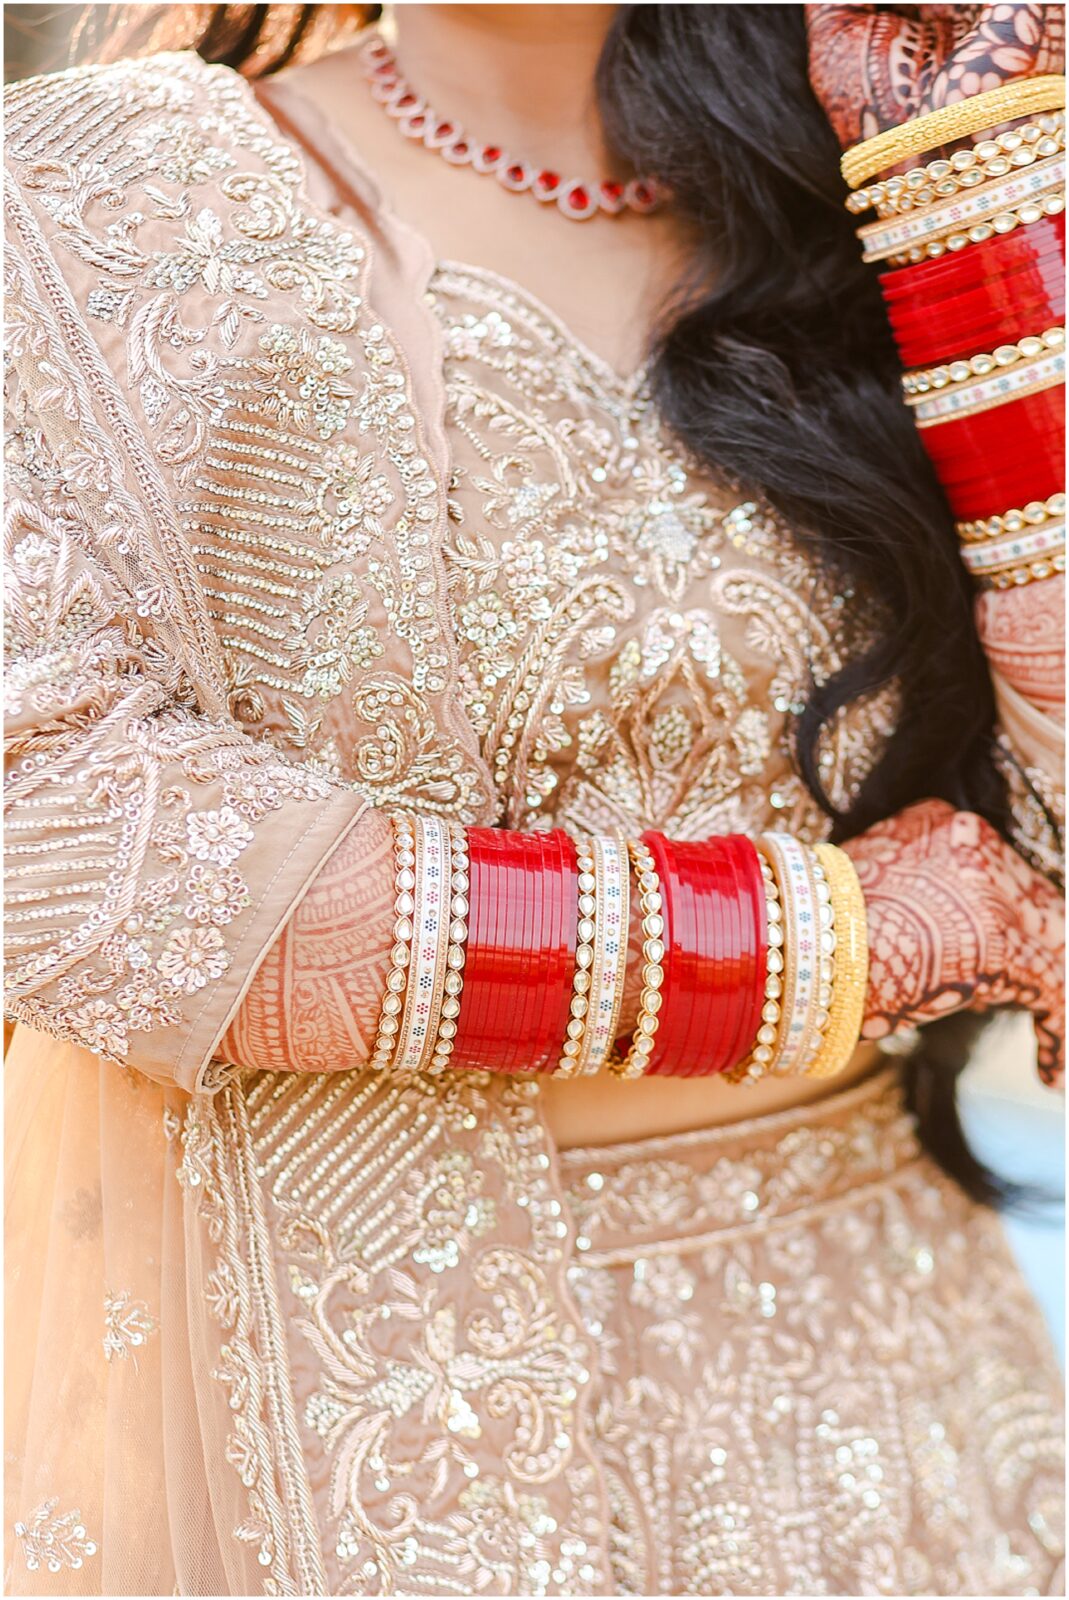 beautiful indian bridal makeup - indian wedding photography - south asian wedding photographer in kansas city & stl - indian wedding outfit - sikh indian wedding kansas city and stl wedding photography and videography - wedding henna design 